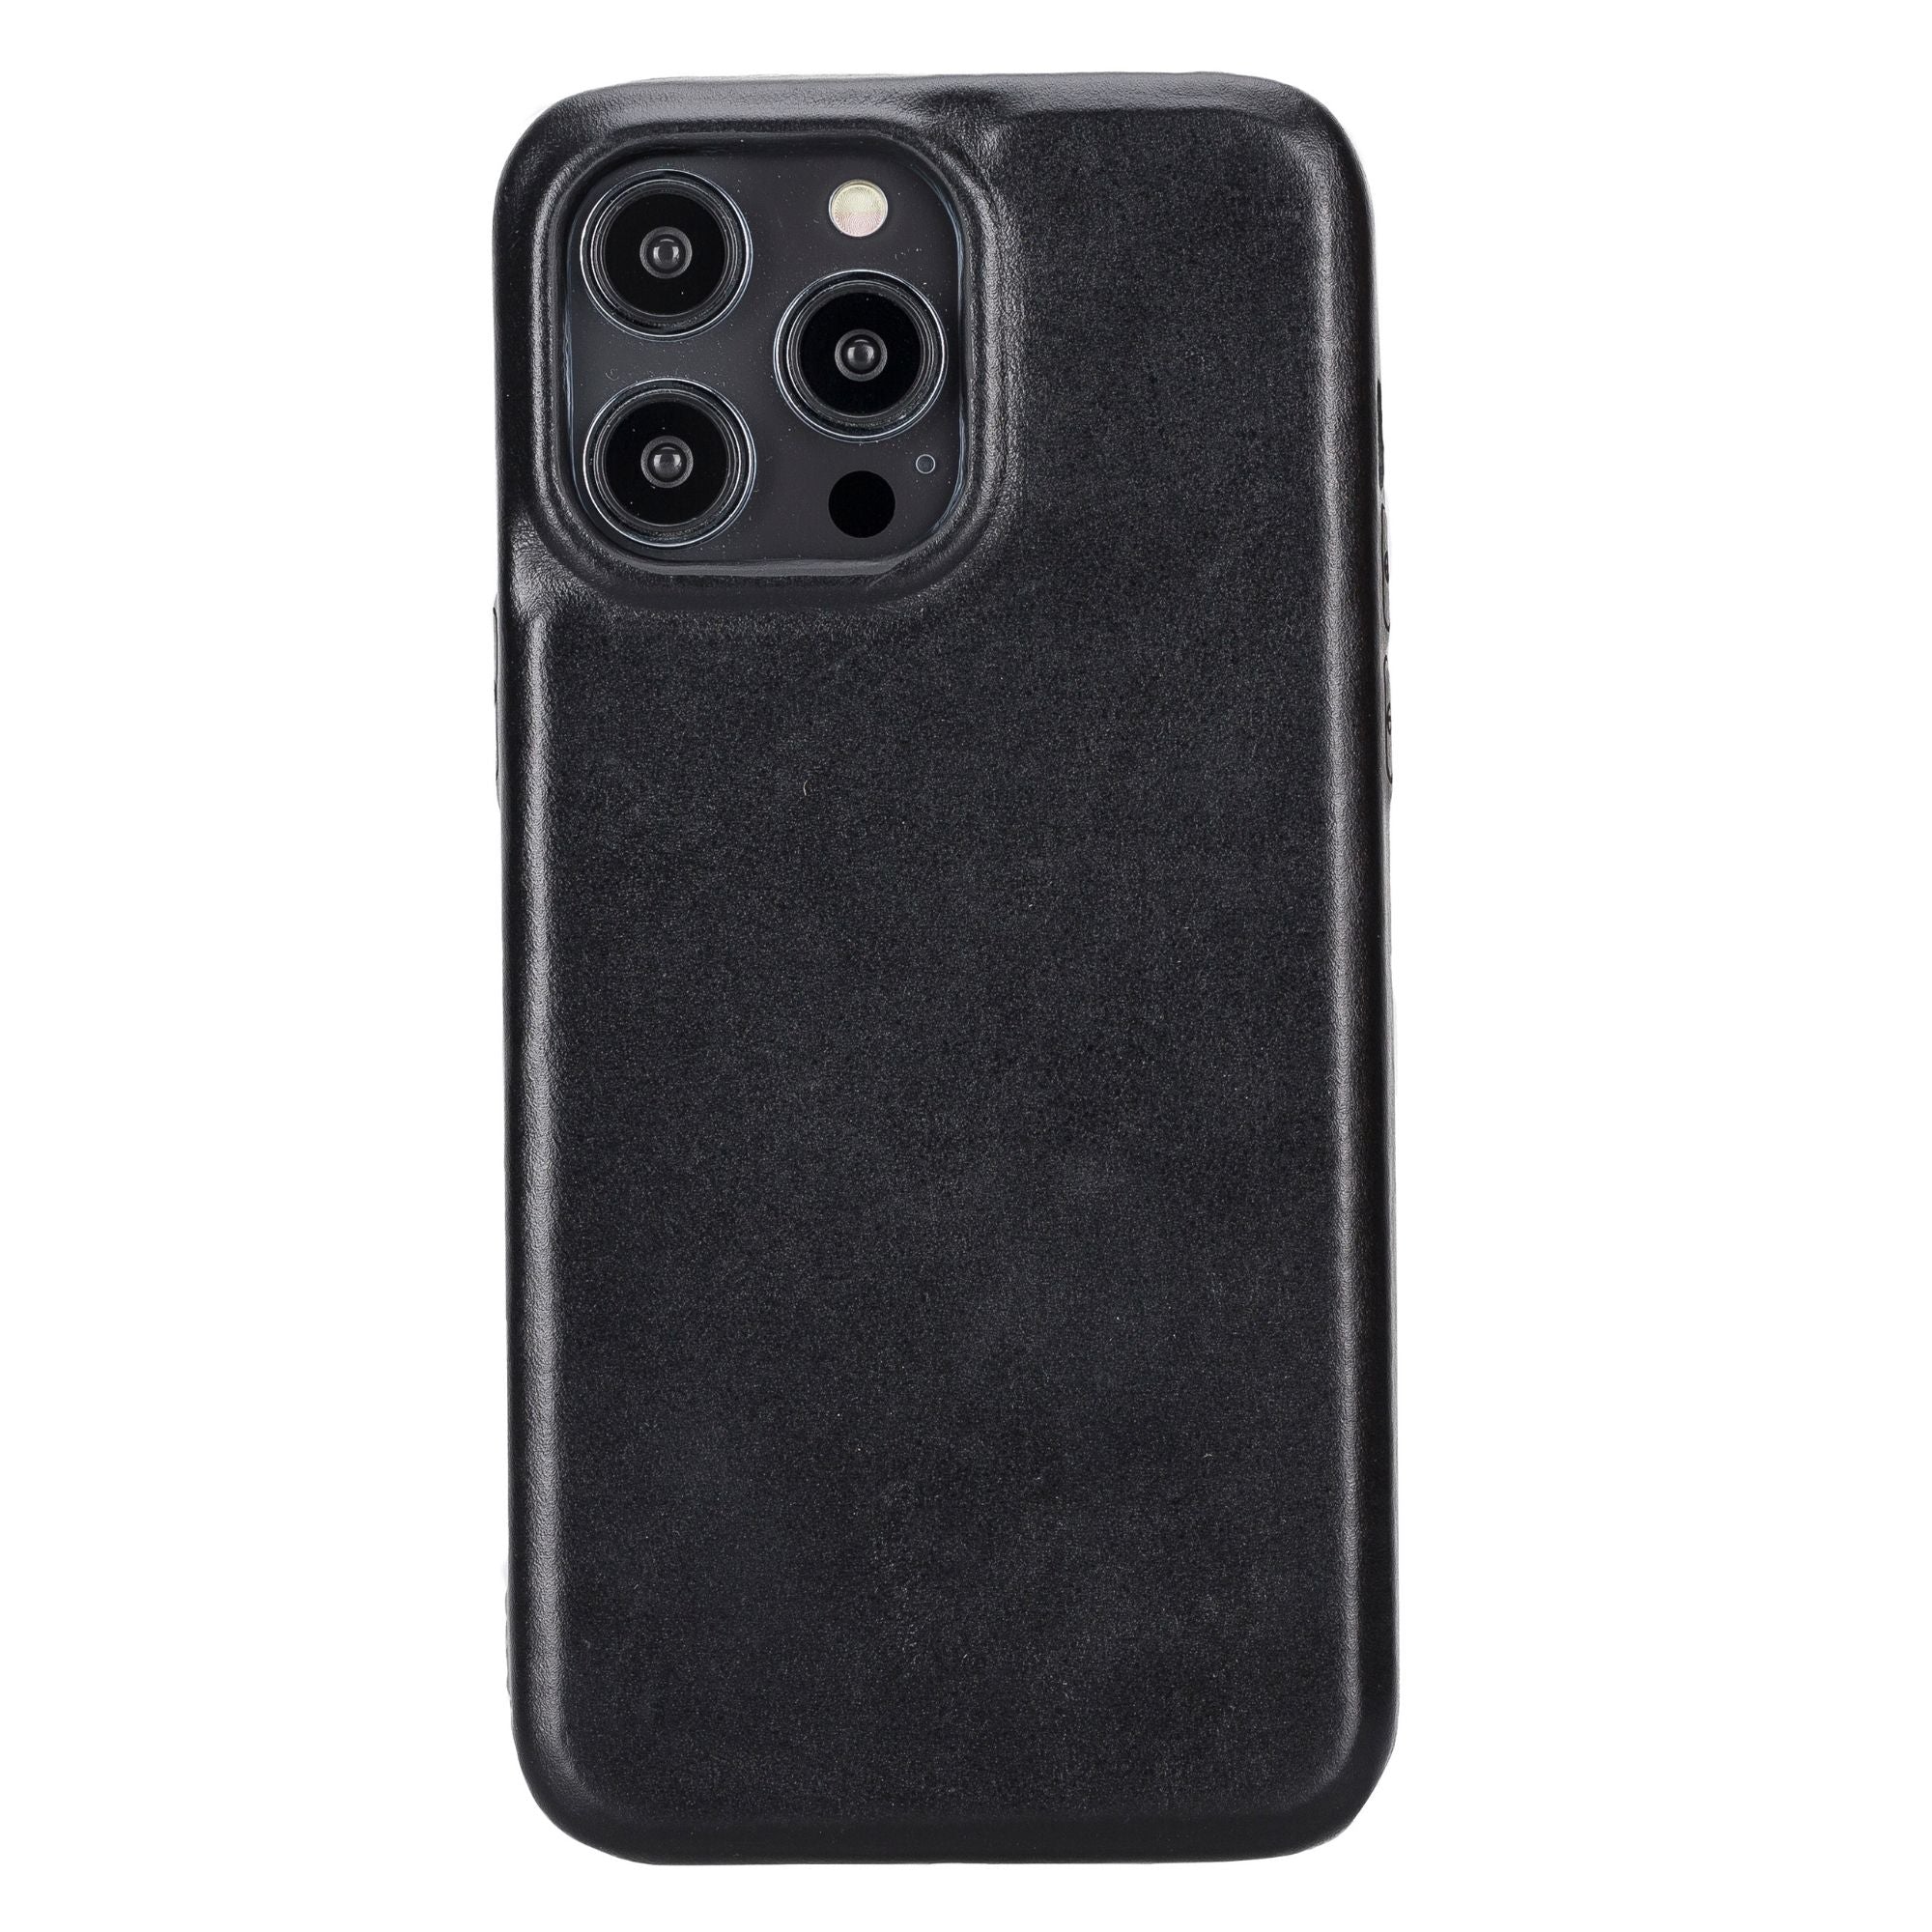 Black Leather iPhone 11 Pro Max Cover, iPhone Cases